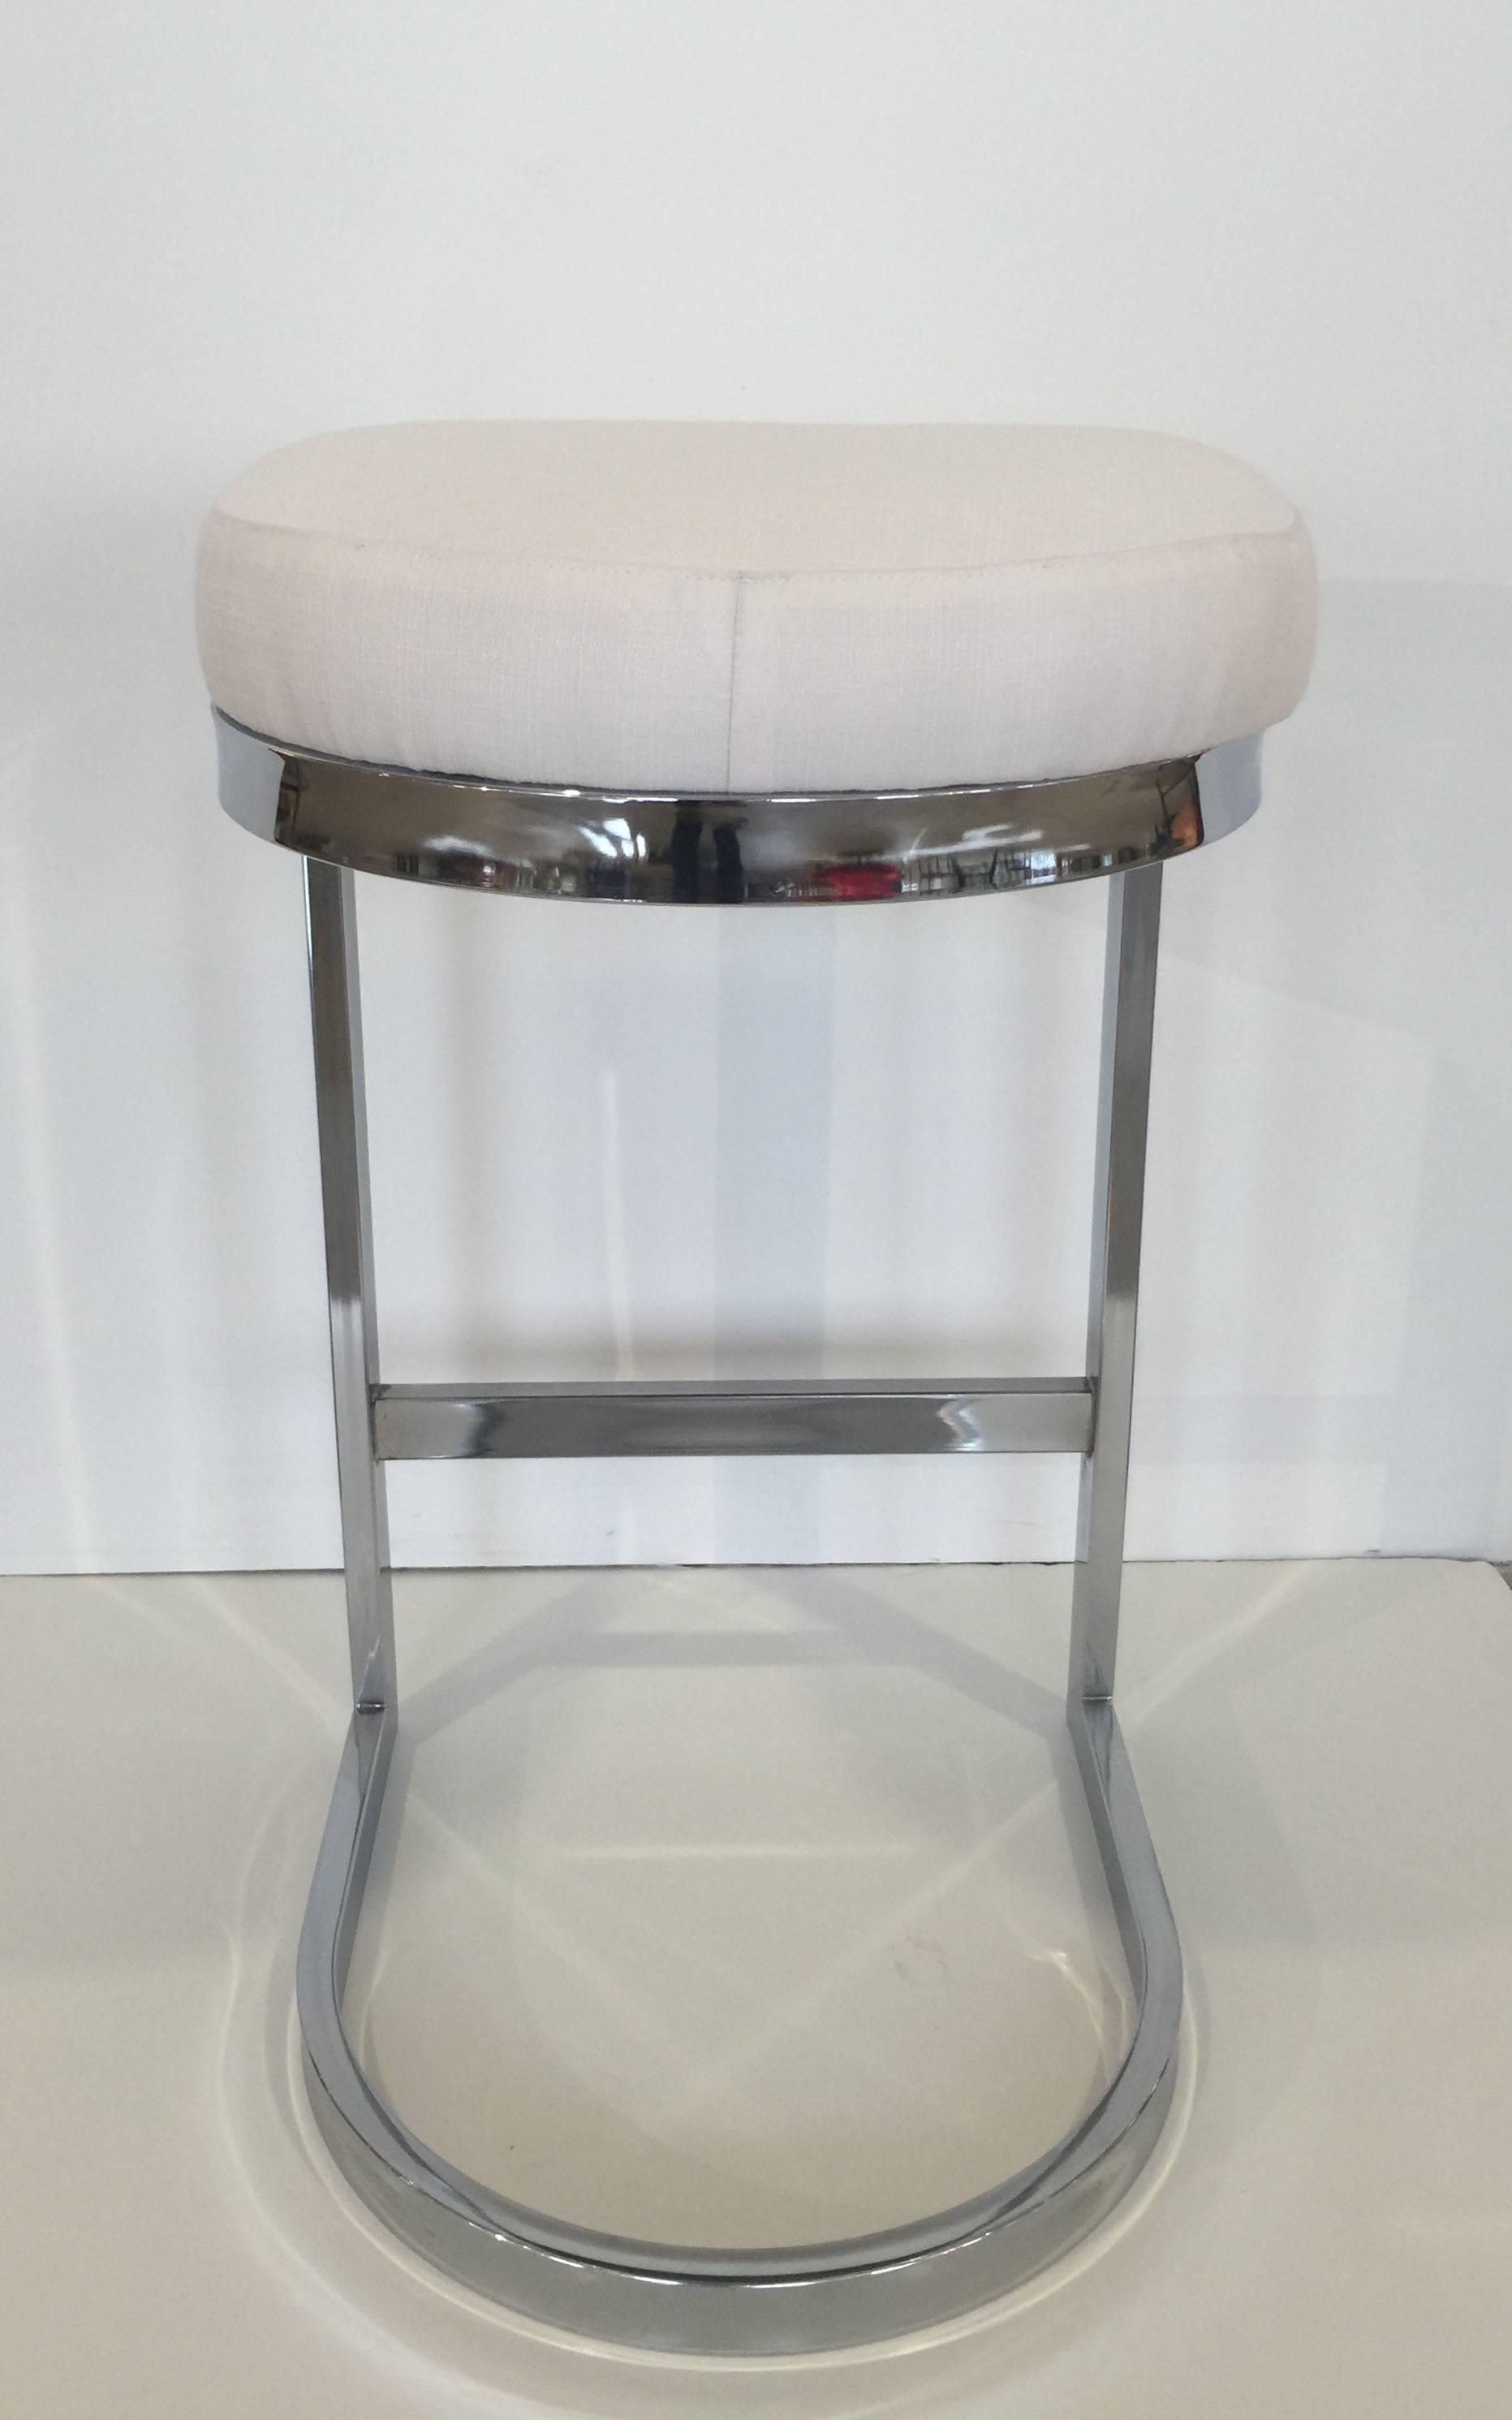 Chrome bar stool with upholstered seat by Design Institute of America. USA, circa 1970. Priced individually. Includes new re-upholstery in Sunbrella off white, linen-look fabric. Also available in COM/COL; one yard of fabric per stool and two week